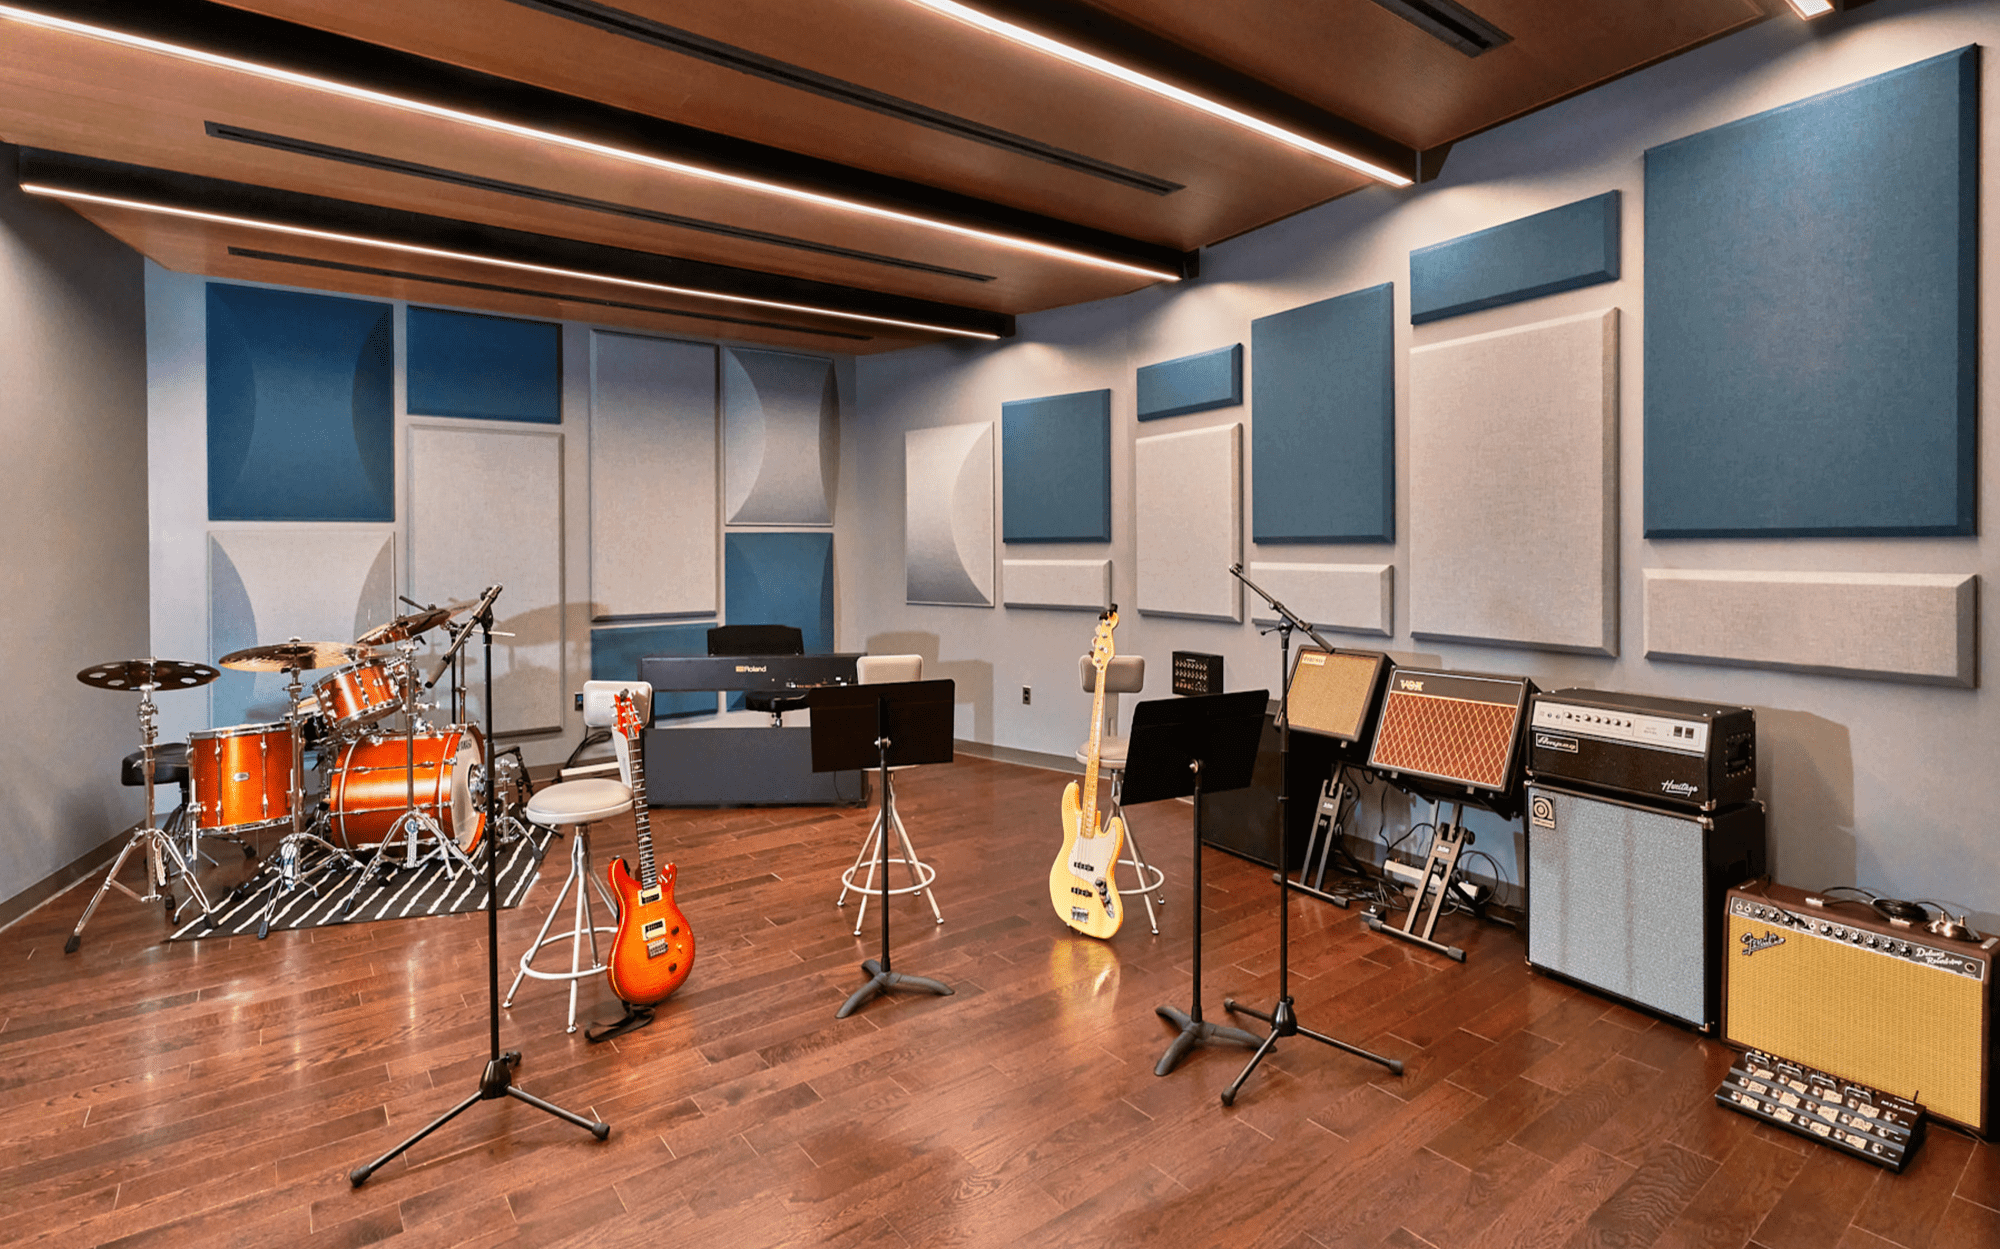 A look at the Middlesex Magnet School’s Recording Studio, designed by the education architects at SSP Architectural Group.